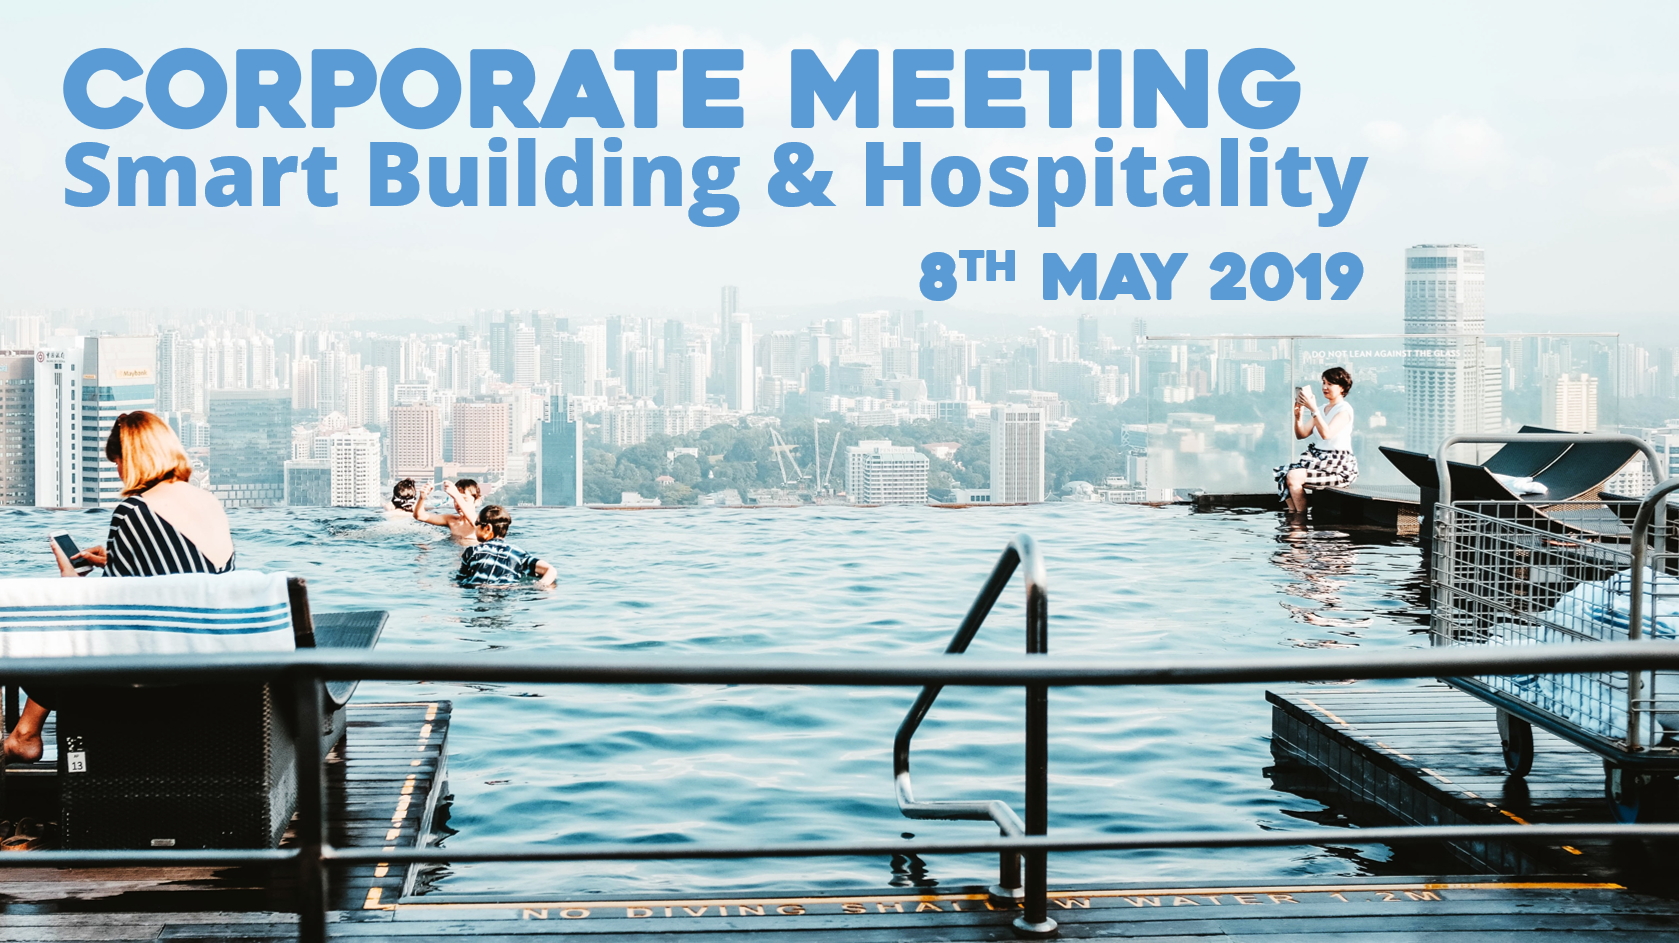 Corporate Meeting Smart Building & Hospitality